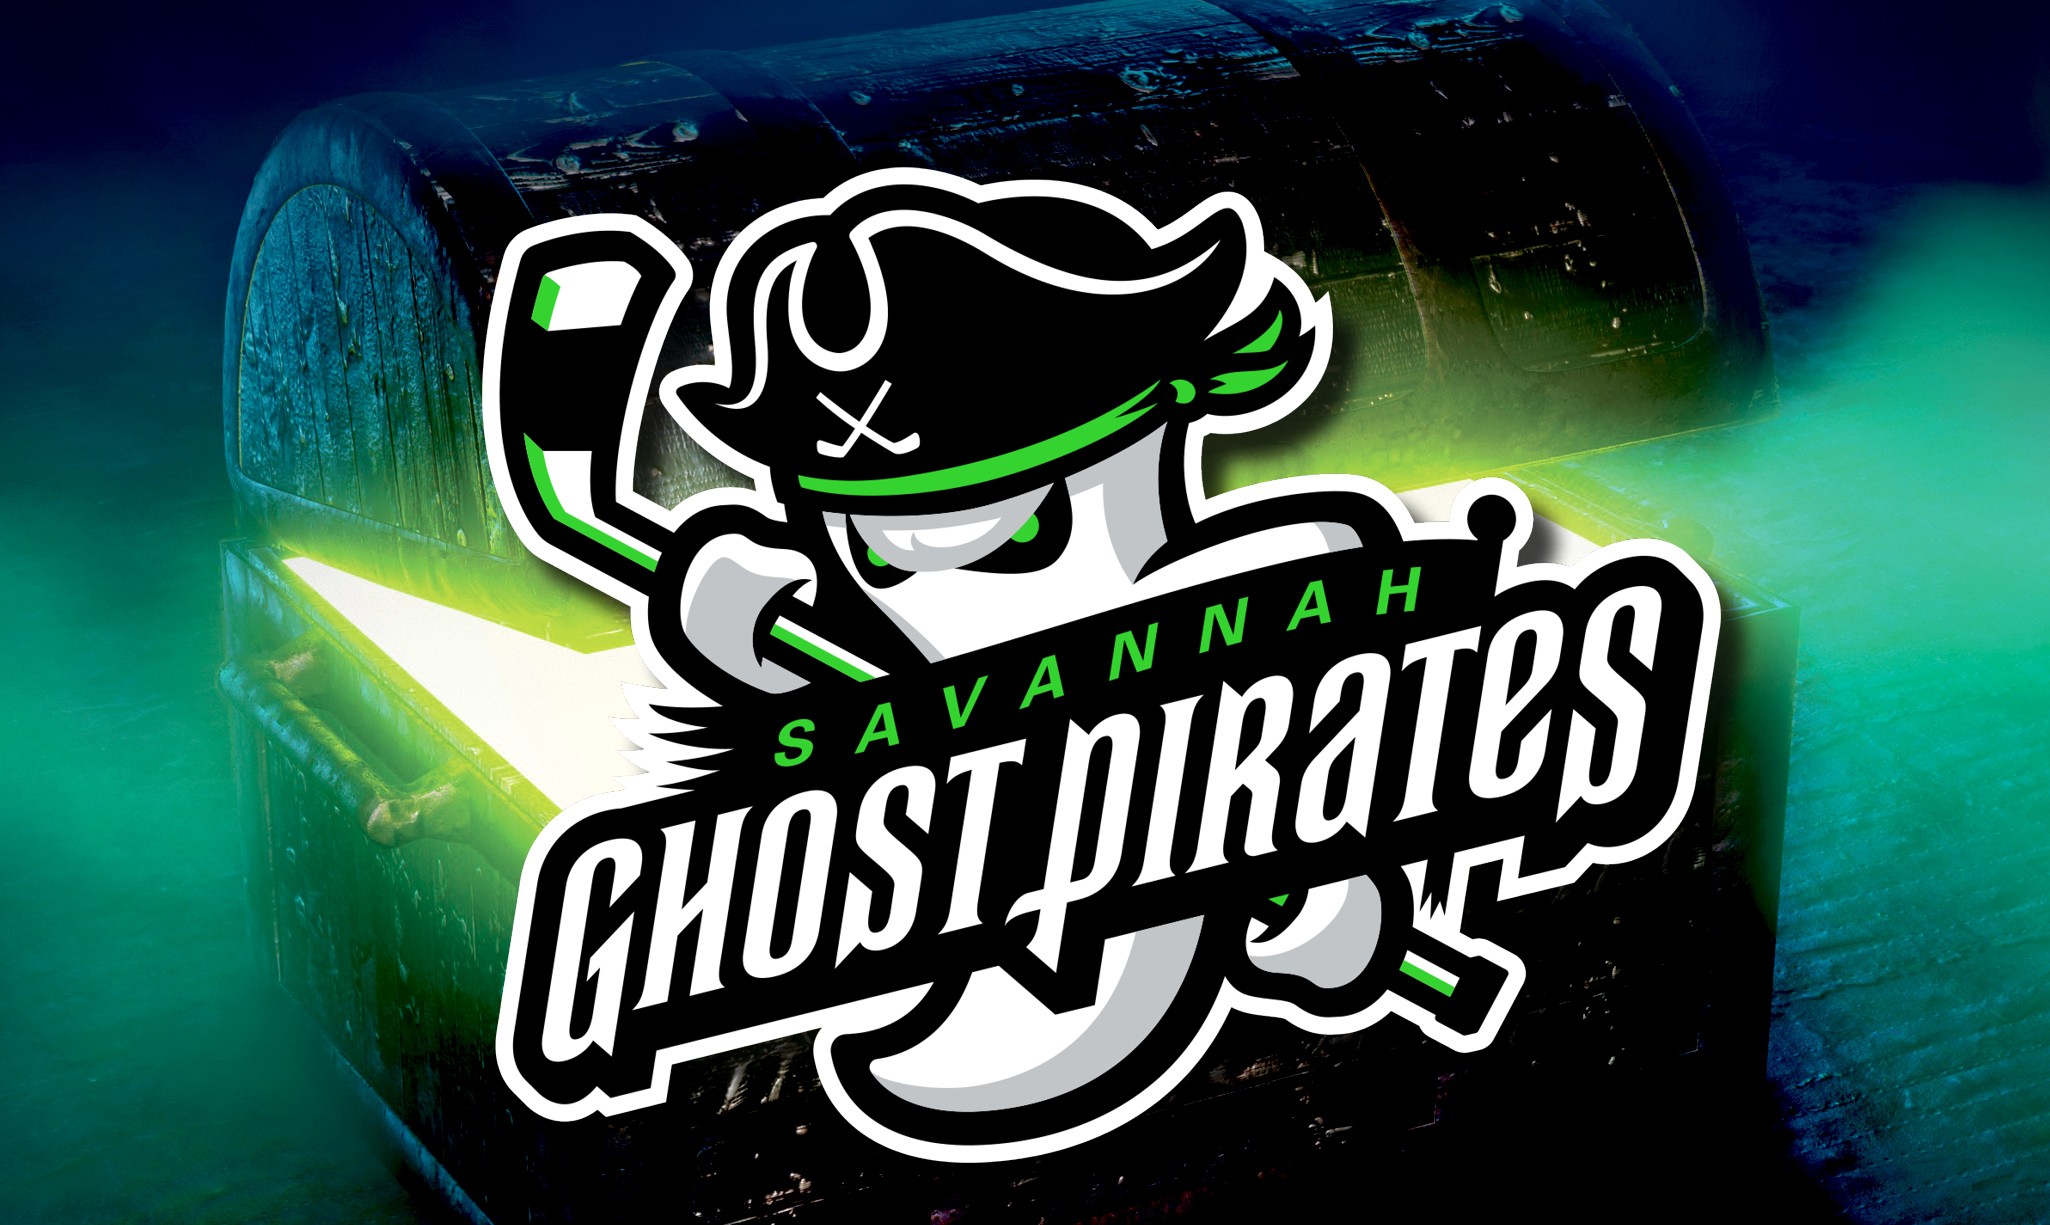 GHOST PIRATES: Savannah's new hockey team announces new name and